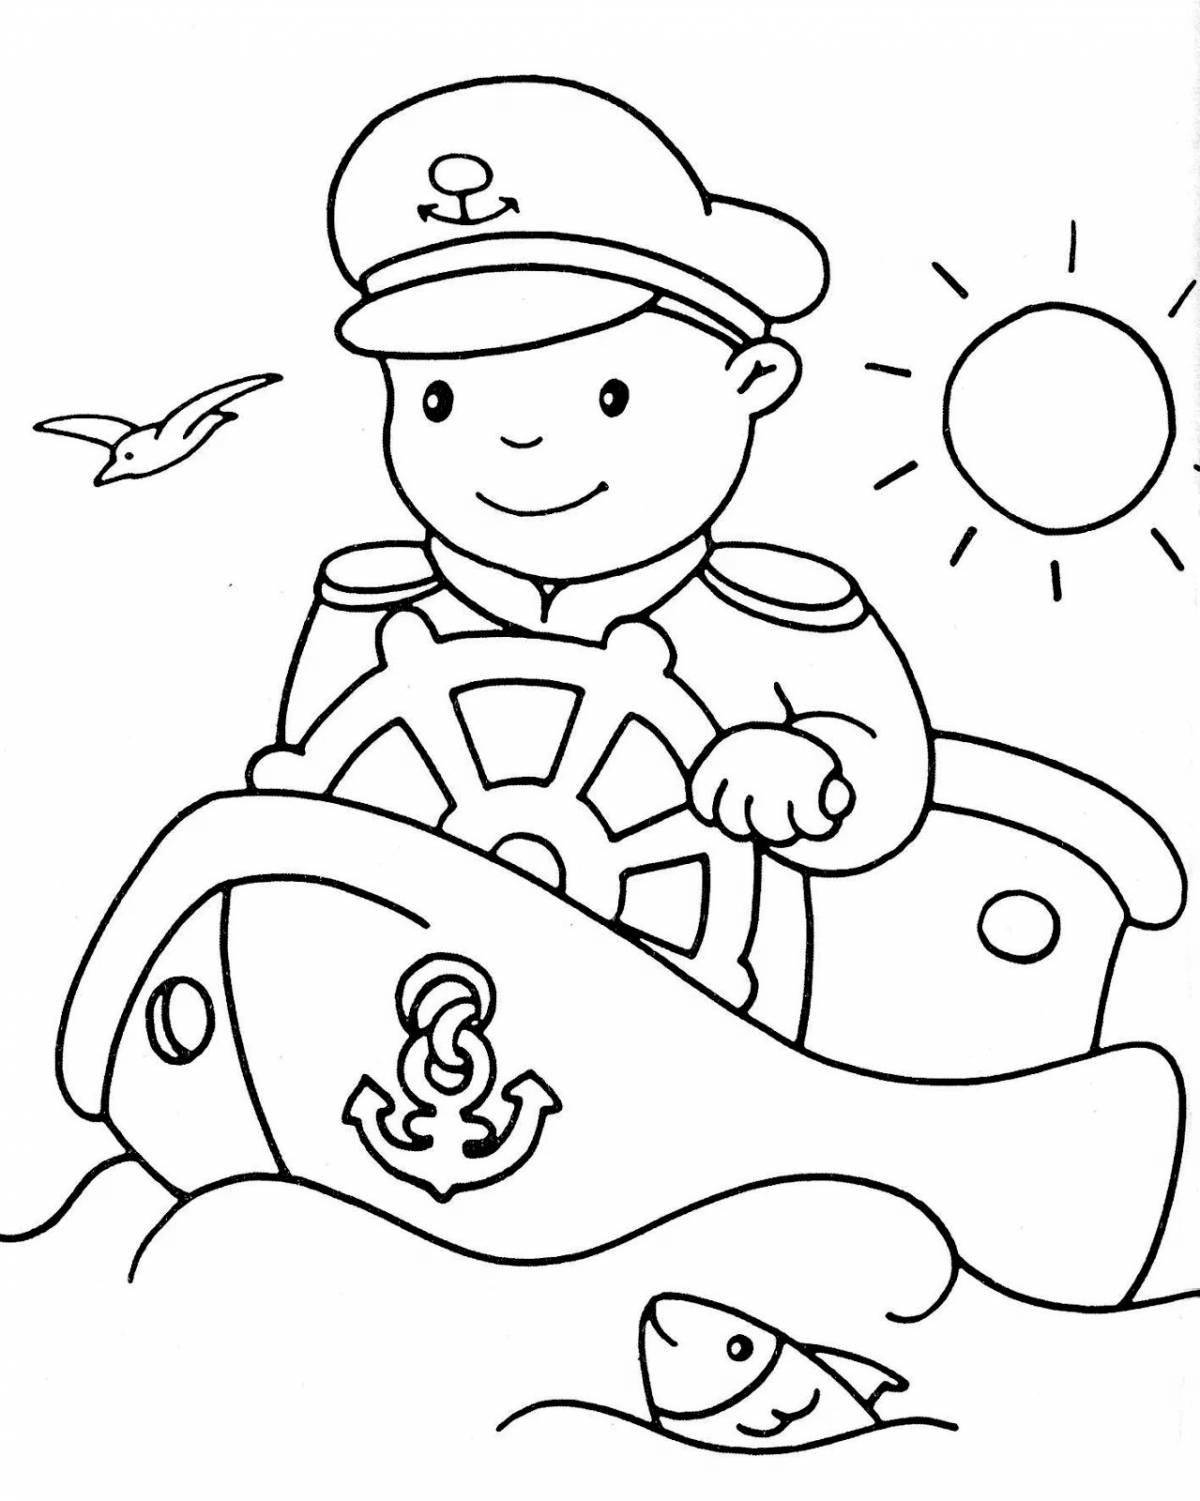 Fun military coloring book for 3-4 year olds